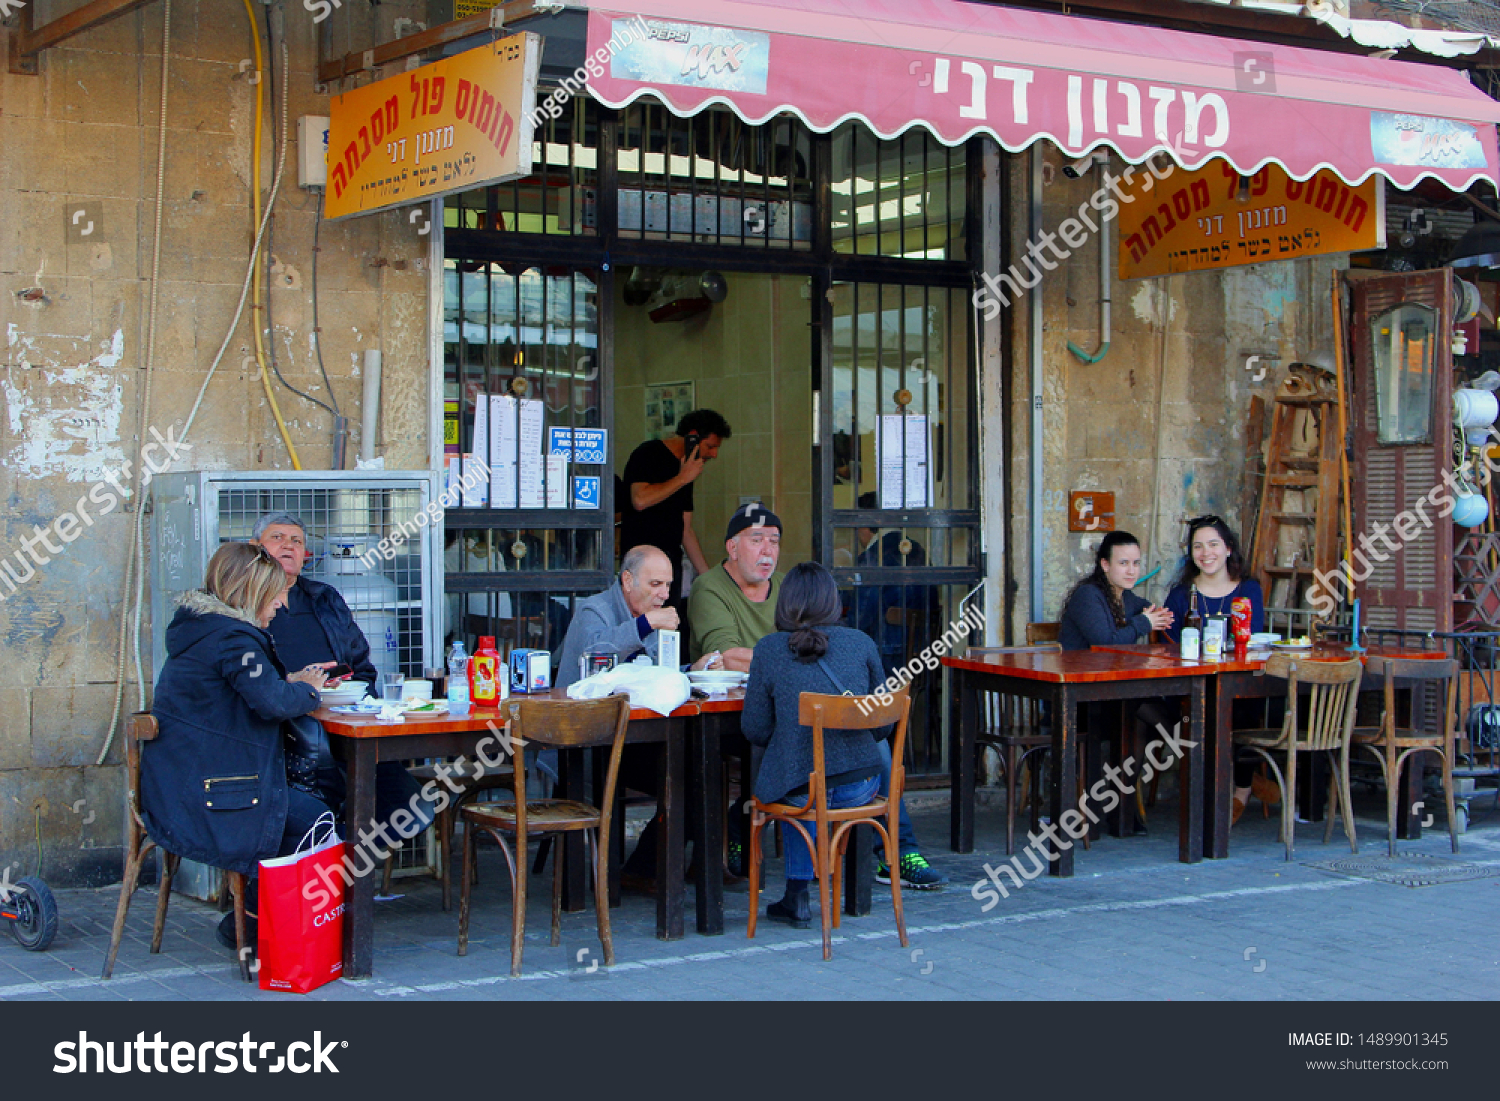 stock-photo-tel-aviv-old-jaffa-israel-february-young-smiling-women-and-elderly-people-eat-and-1489901345.jpg